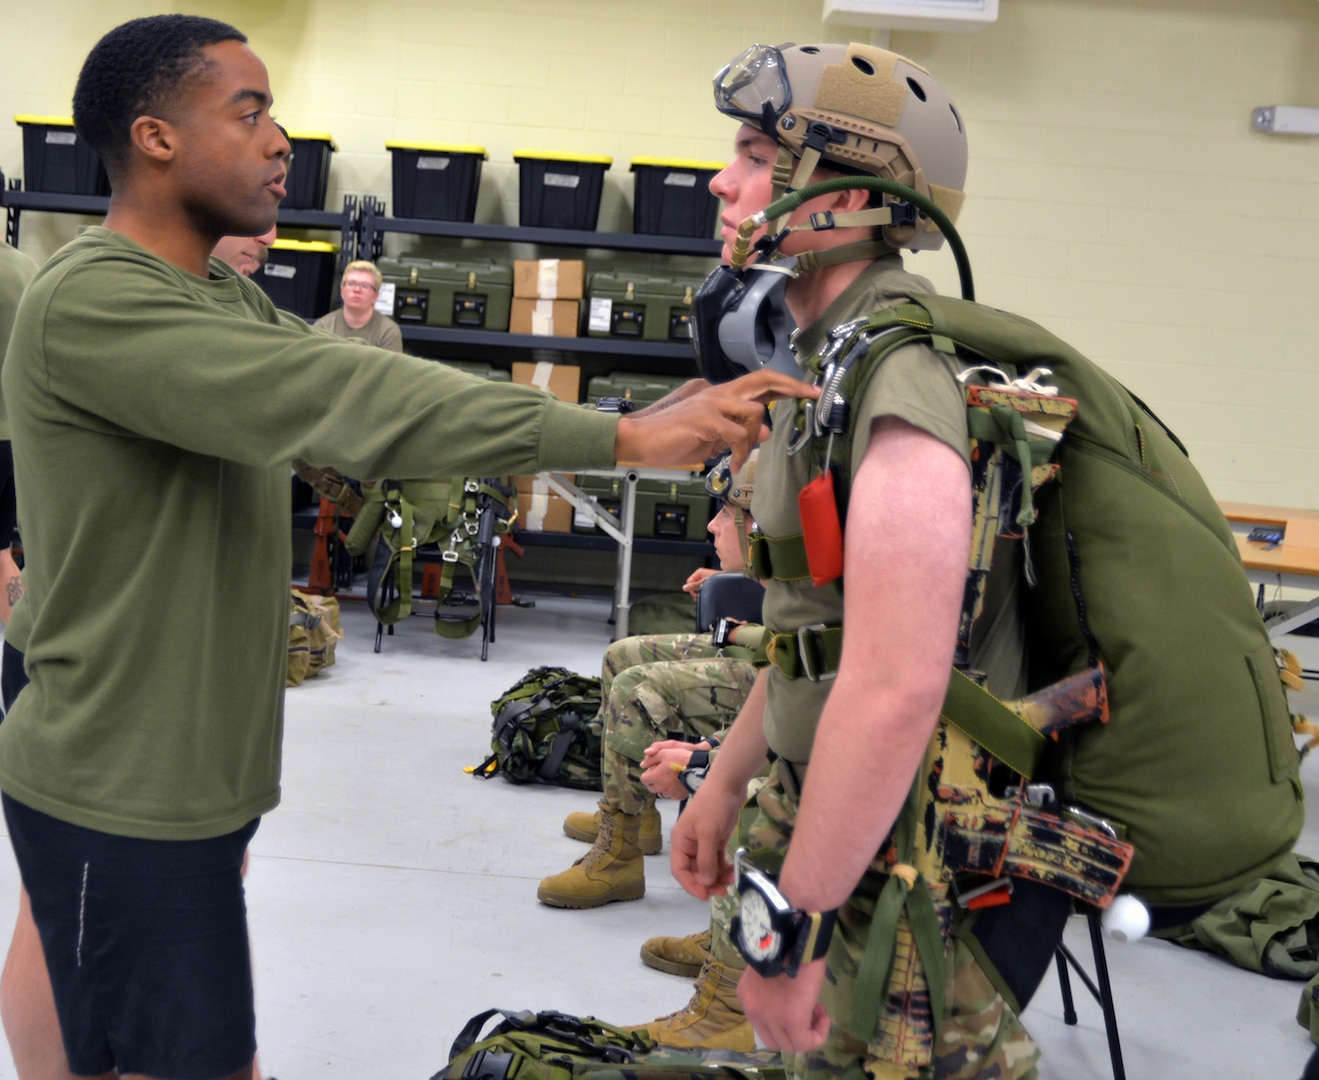 Staff Sgt. Washington of U.S. Marine Corps Forces Special Operations Command (left) conducts an inspection of military free-fall jumping equipment worn by Army Pvt. Austin Corbett, a member of Company B, 232nd Medical Battalion, at Joint Base San Antonio-Fort Sam Houston. Washington is a student in the Marine Military Free-Fall Jumpmaster Course held at the 4th Reconnaissance Battalion, located at JBSA-Fort Sam Houston. The course started Jan. 29 and runs until Feb. 16. Students who complete the course become certified Military Free-Fall Jumpmasters, who oversee every aspect of military free-fall operations, including planning, execution and recovery.